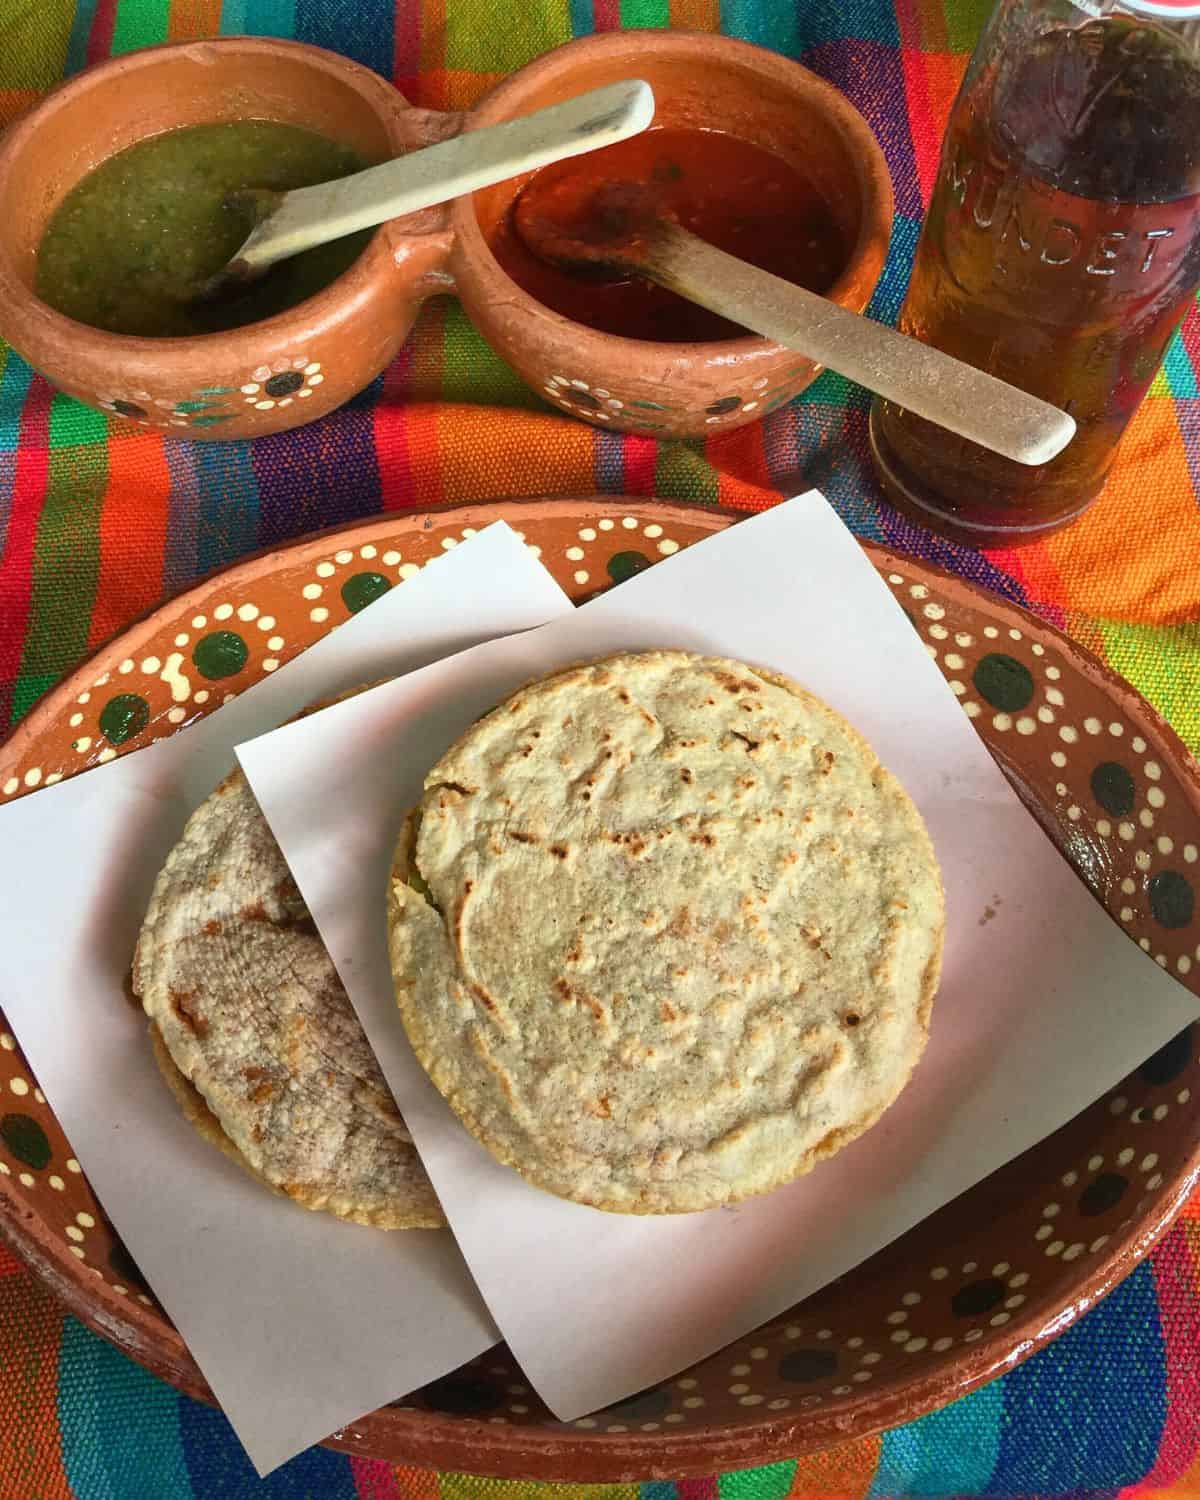 Two Mexican Gorditas plated on a decorative red clay plate.